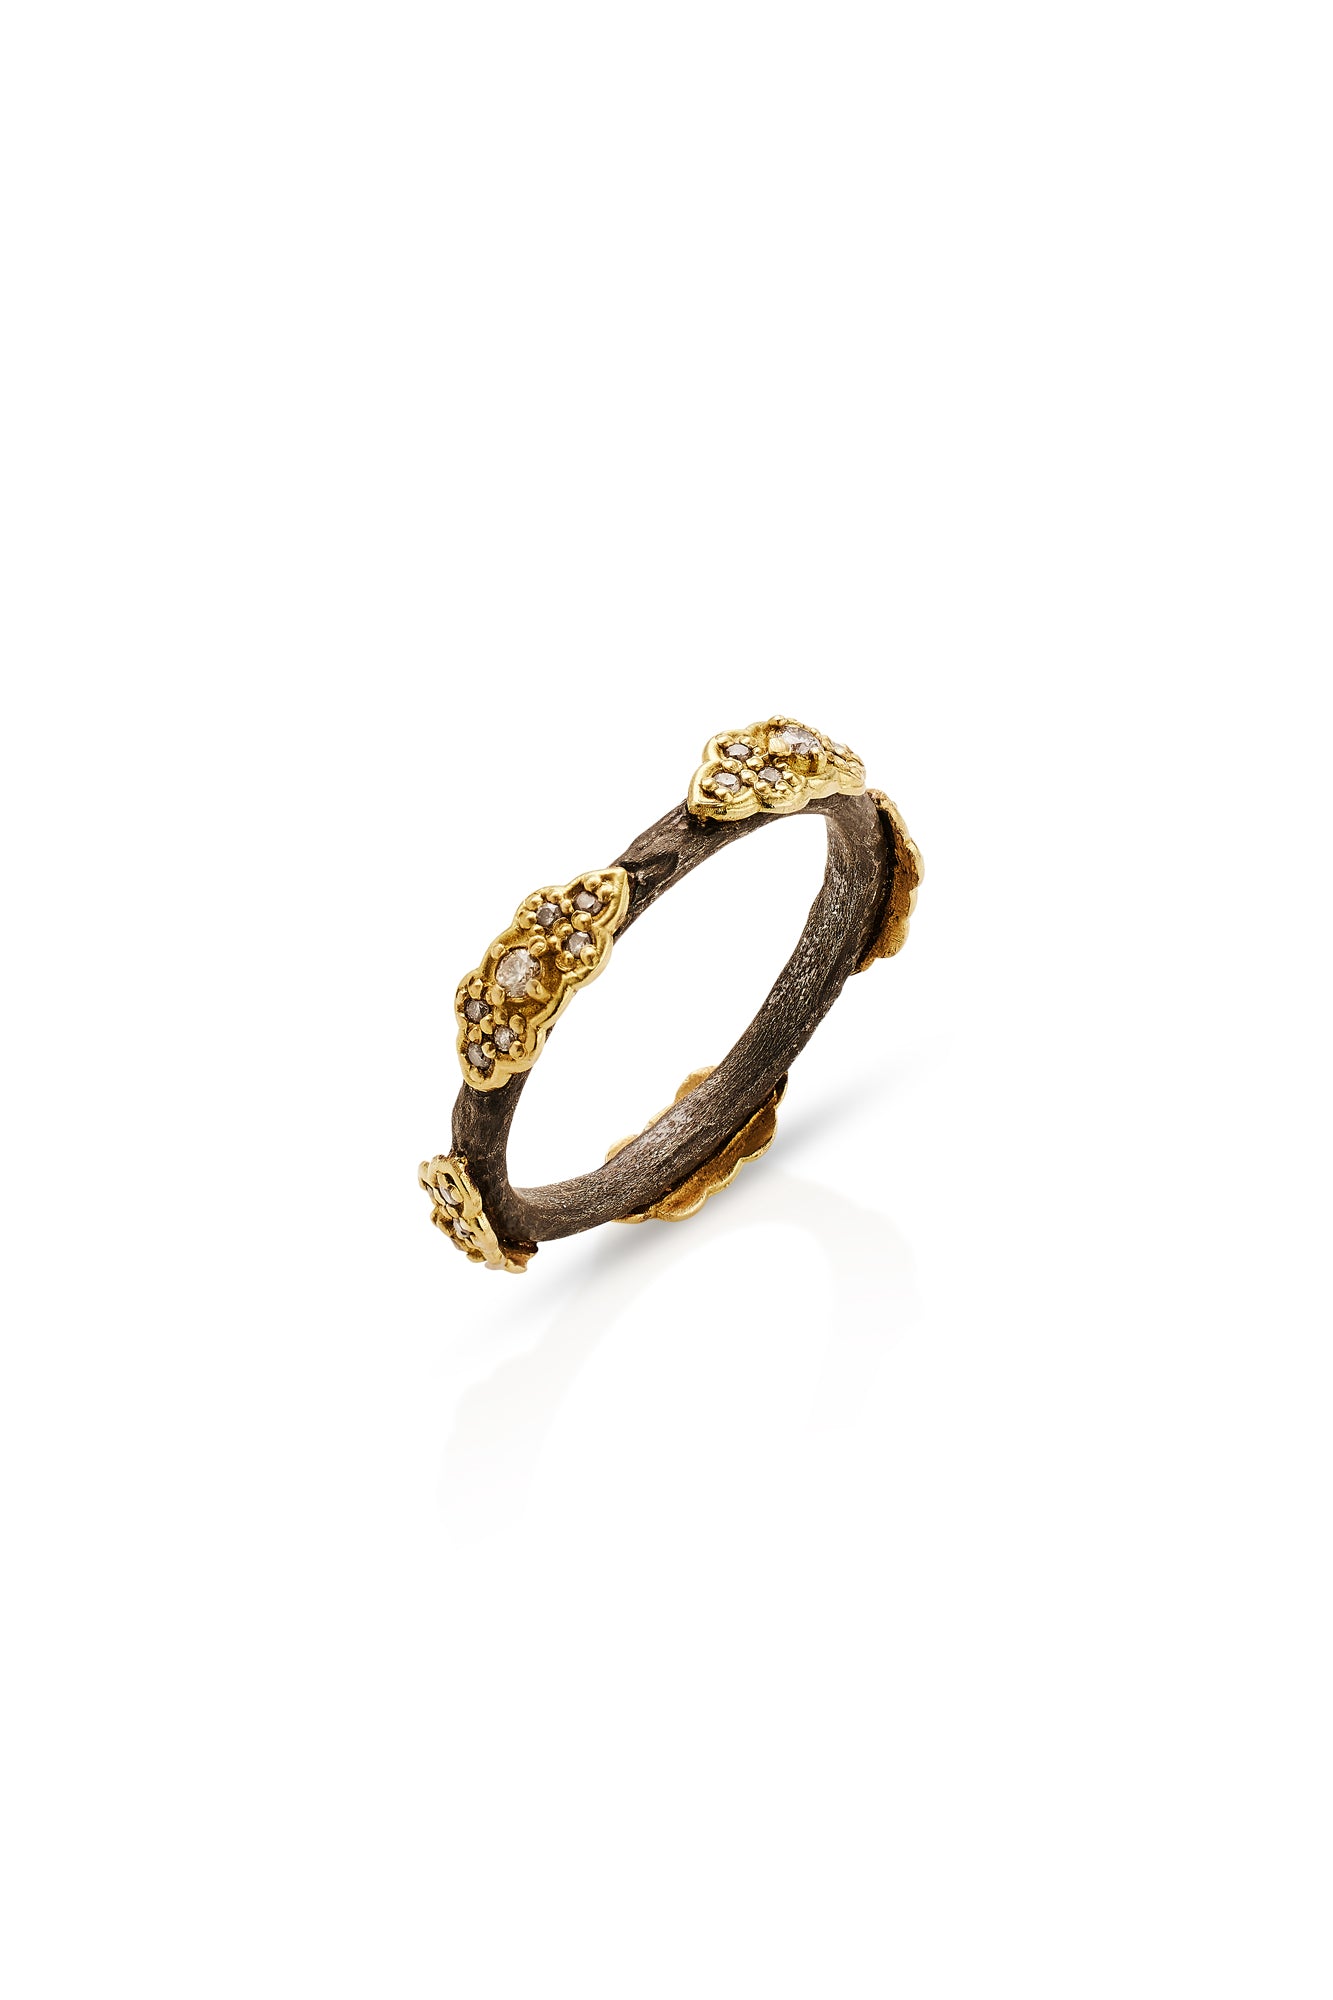 18KY Gold Old World Scroll Ring With Champagne Diamonds